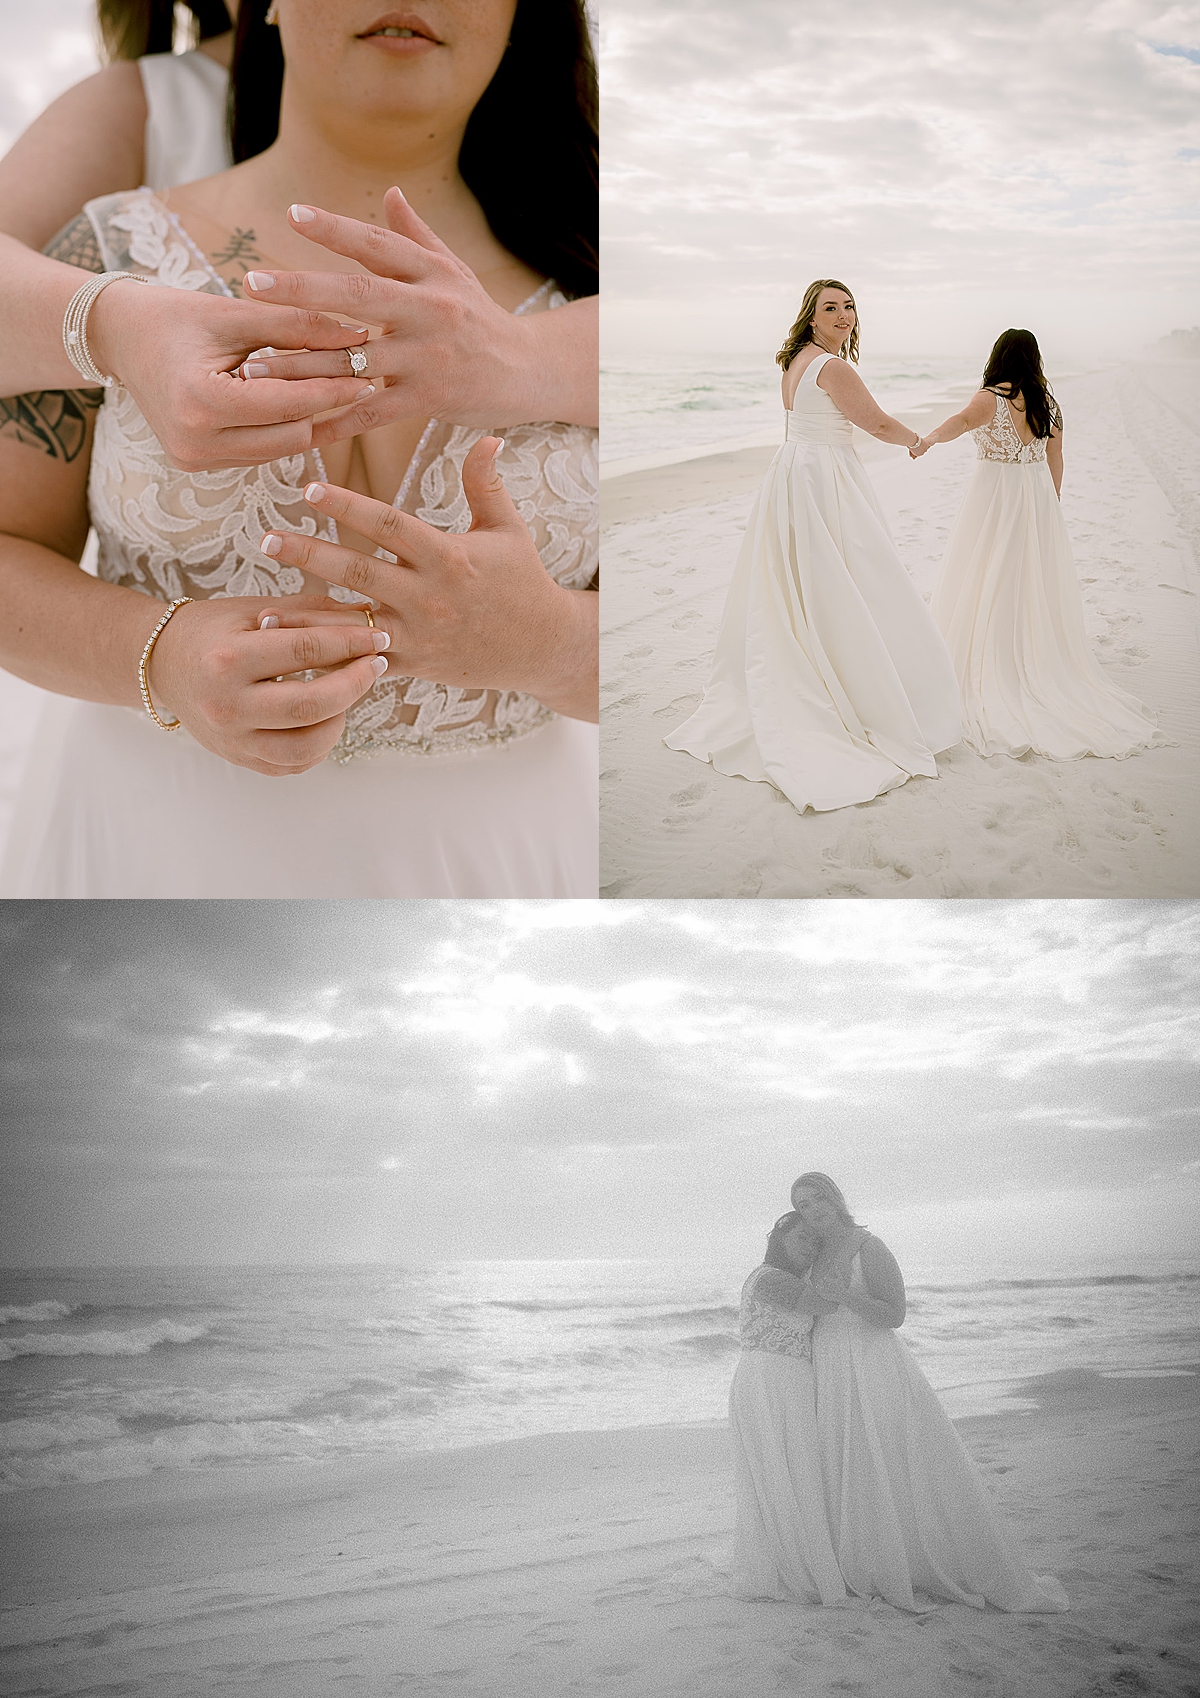 long white dresses and showing off wedding bands for intimate destination ceremony